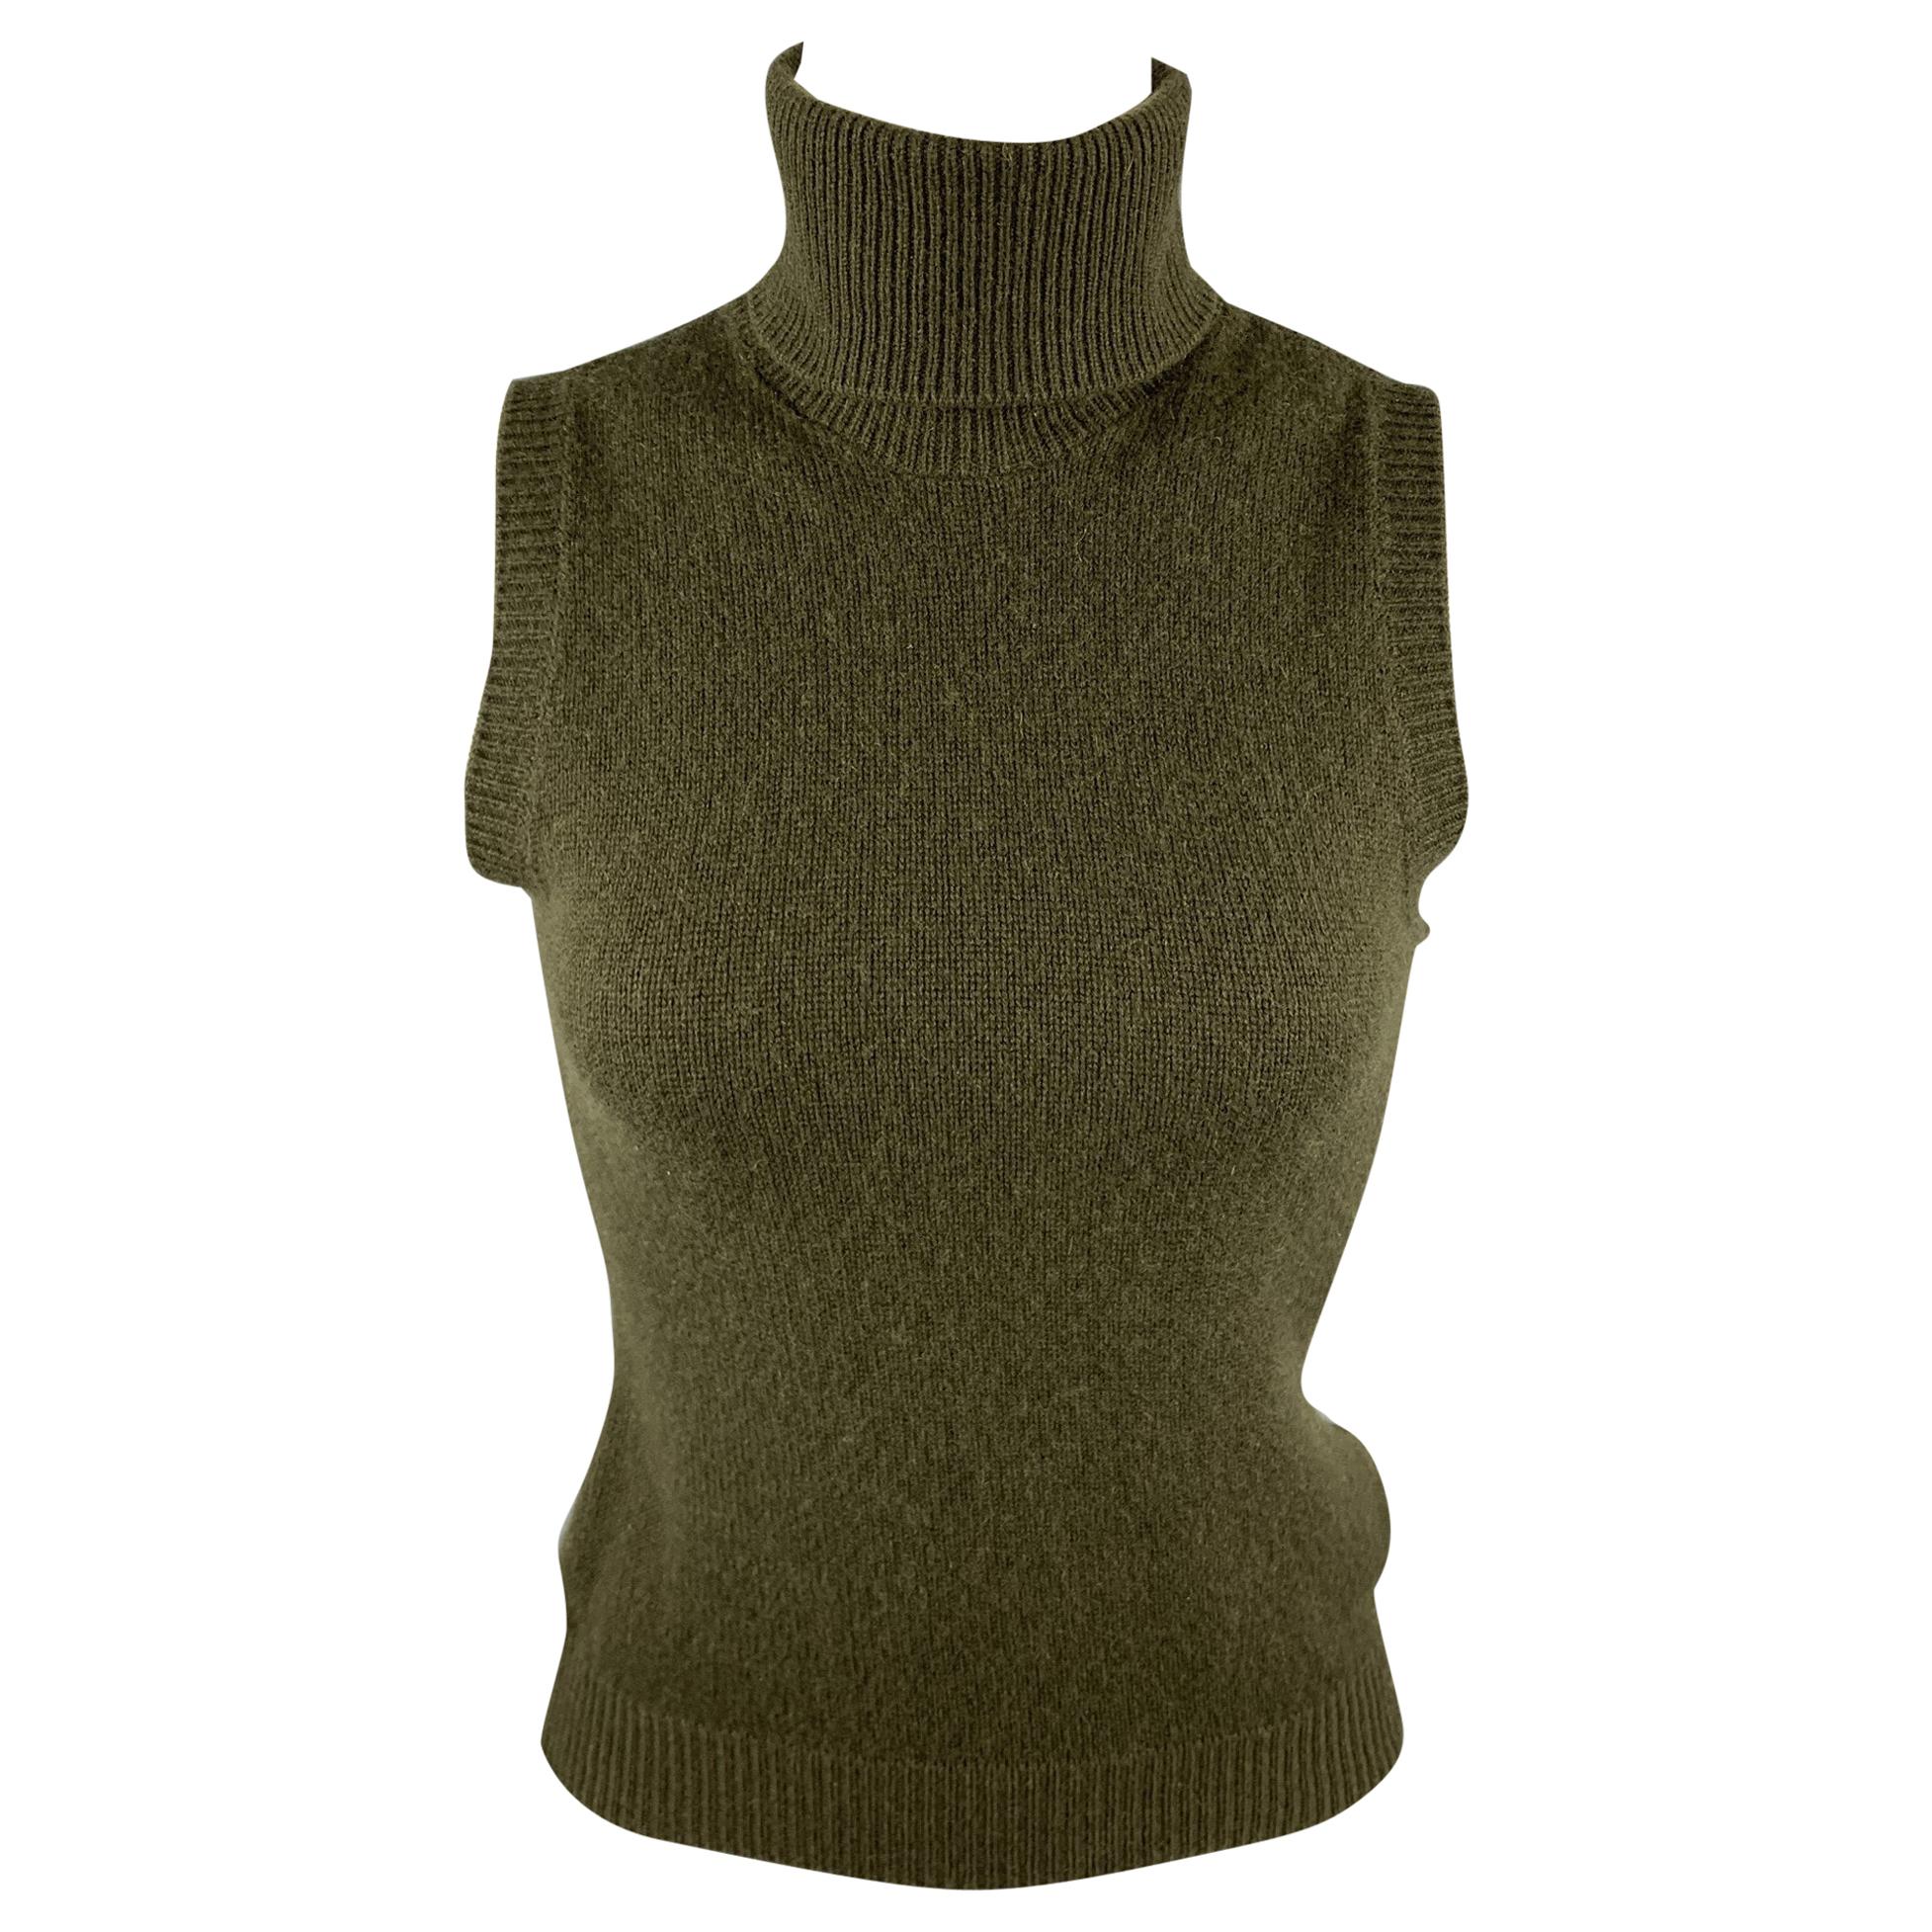 RALPH LAUREN COLLECTION Size S Olive Knitted Cashmere Sleeveless Pullover